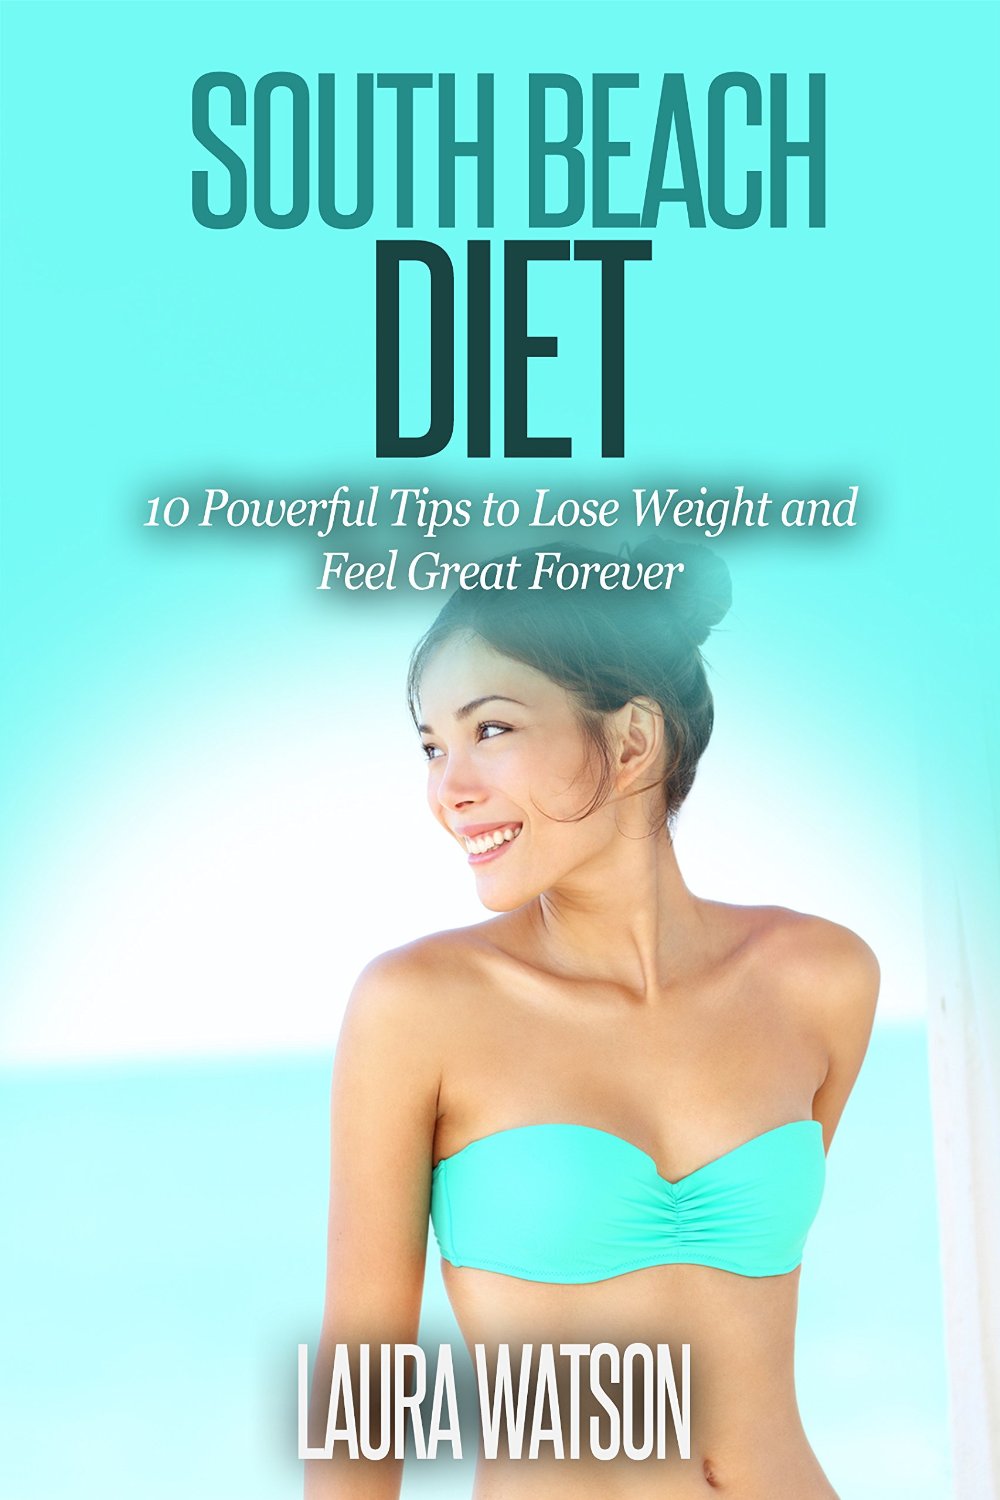 FREE: South Beach Diet: 10 Powerful Tips to Lose Weight and Feel Great Forever by Laura Watson